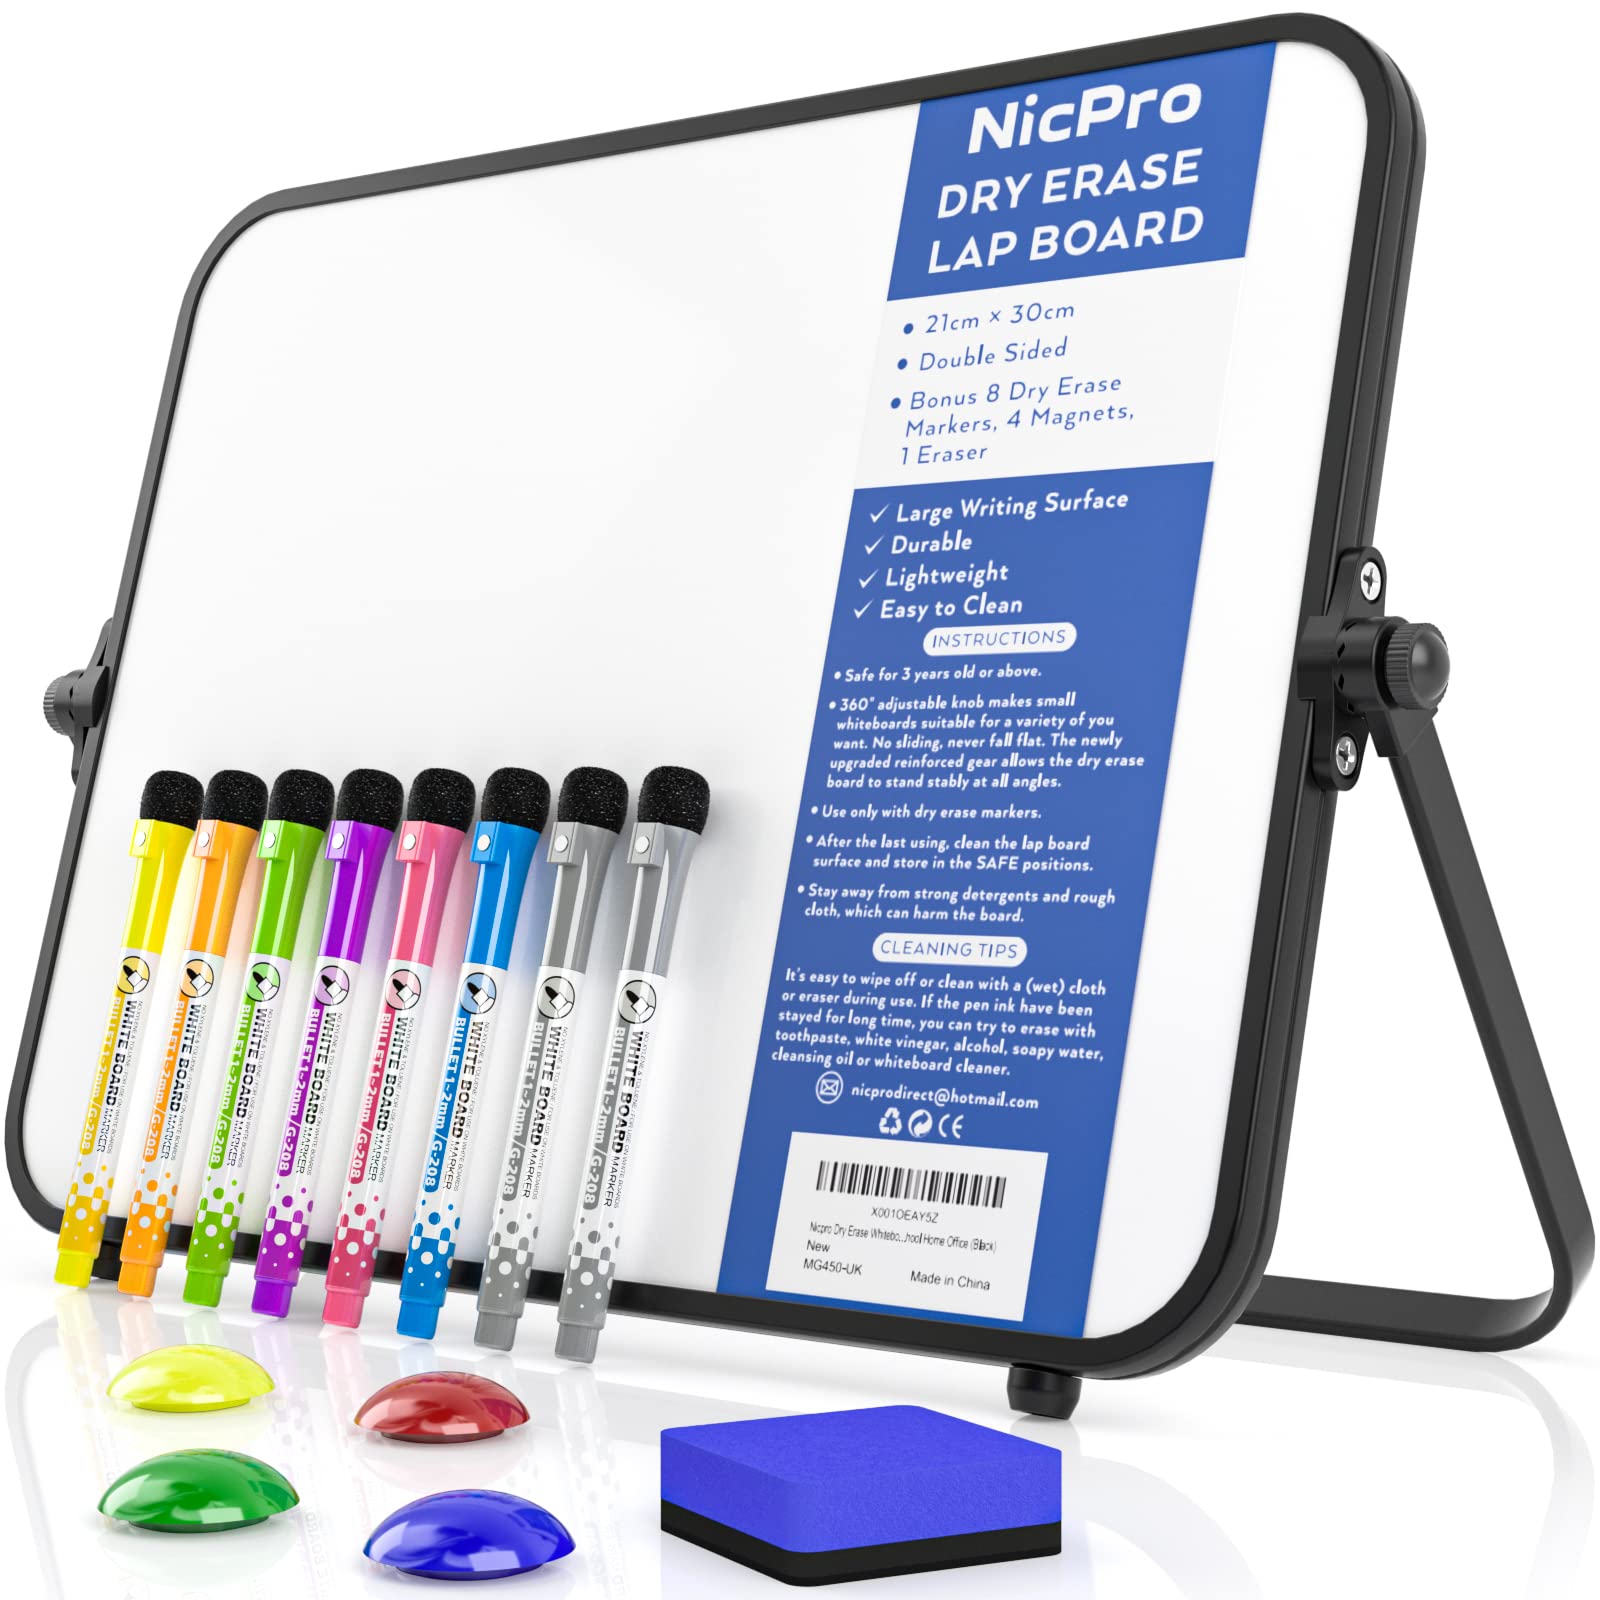 Dry Erase White Board, 14inX11in Magnetic Desktop Whiteboard with Stand, Portable Double-Sided White Board Easel for Kids Memo to Do List Desk School